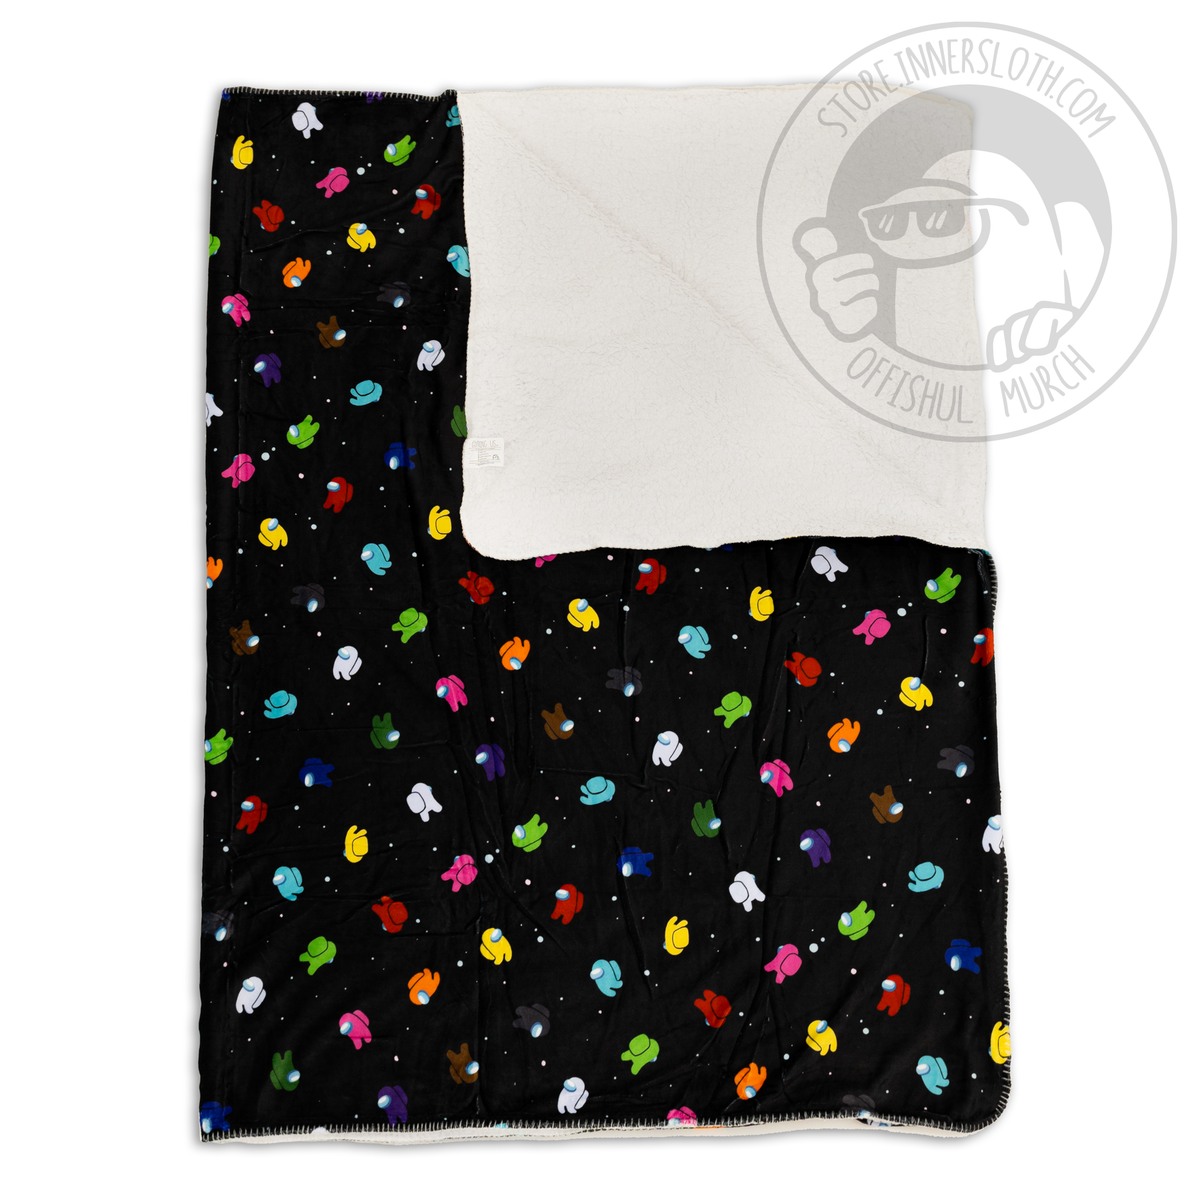 A black Among Us blanket featuring the colorful Crewmates &quot;Space Party&quot; pattern, which consists of evenly-spaced Crewmates of all colors floating on a black space background. The blanket is folded, with the top right corner folded back to show the white sherpa lining.